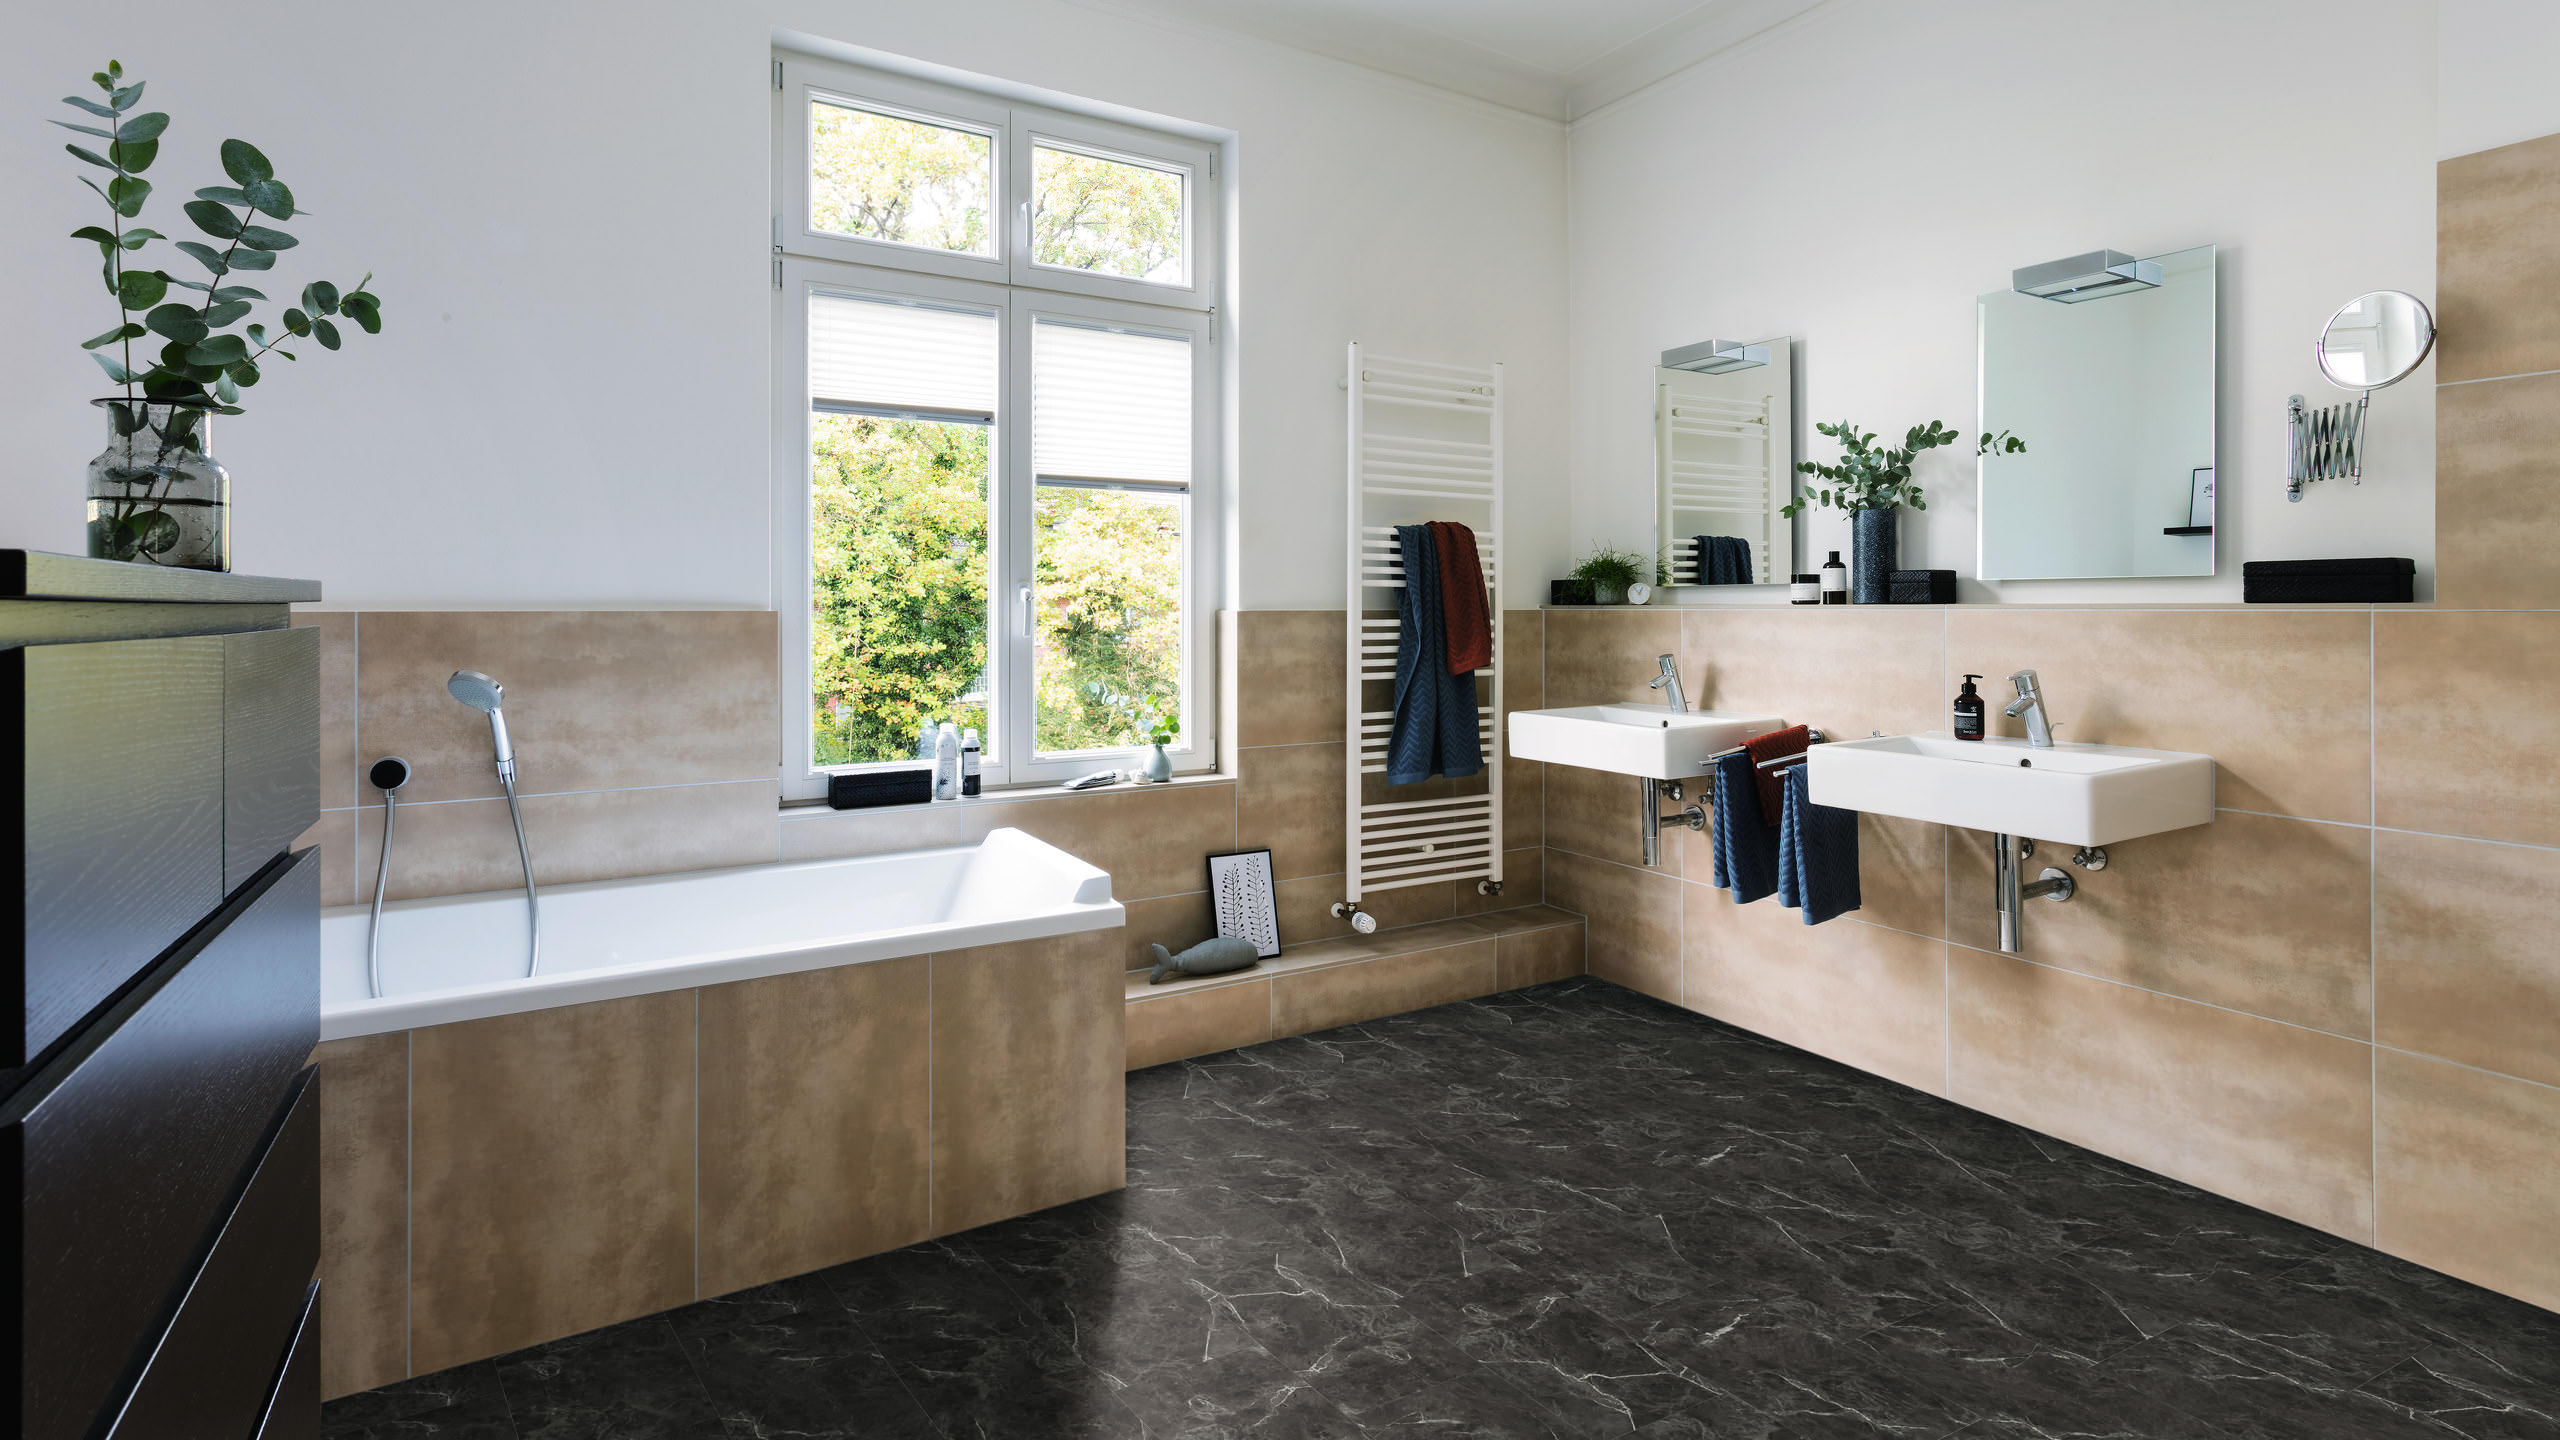 DISANO by HARO ClassicAqua Piazza 4V Marble Anthrazit* stone texture Top Connect